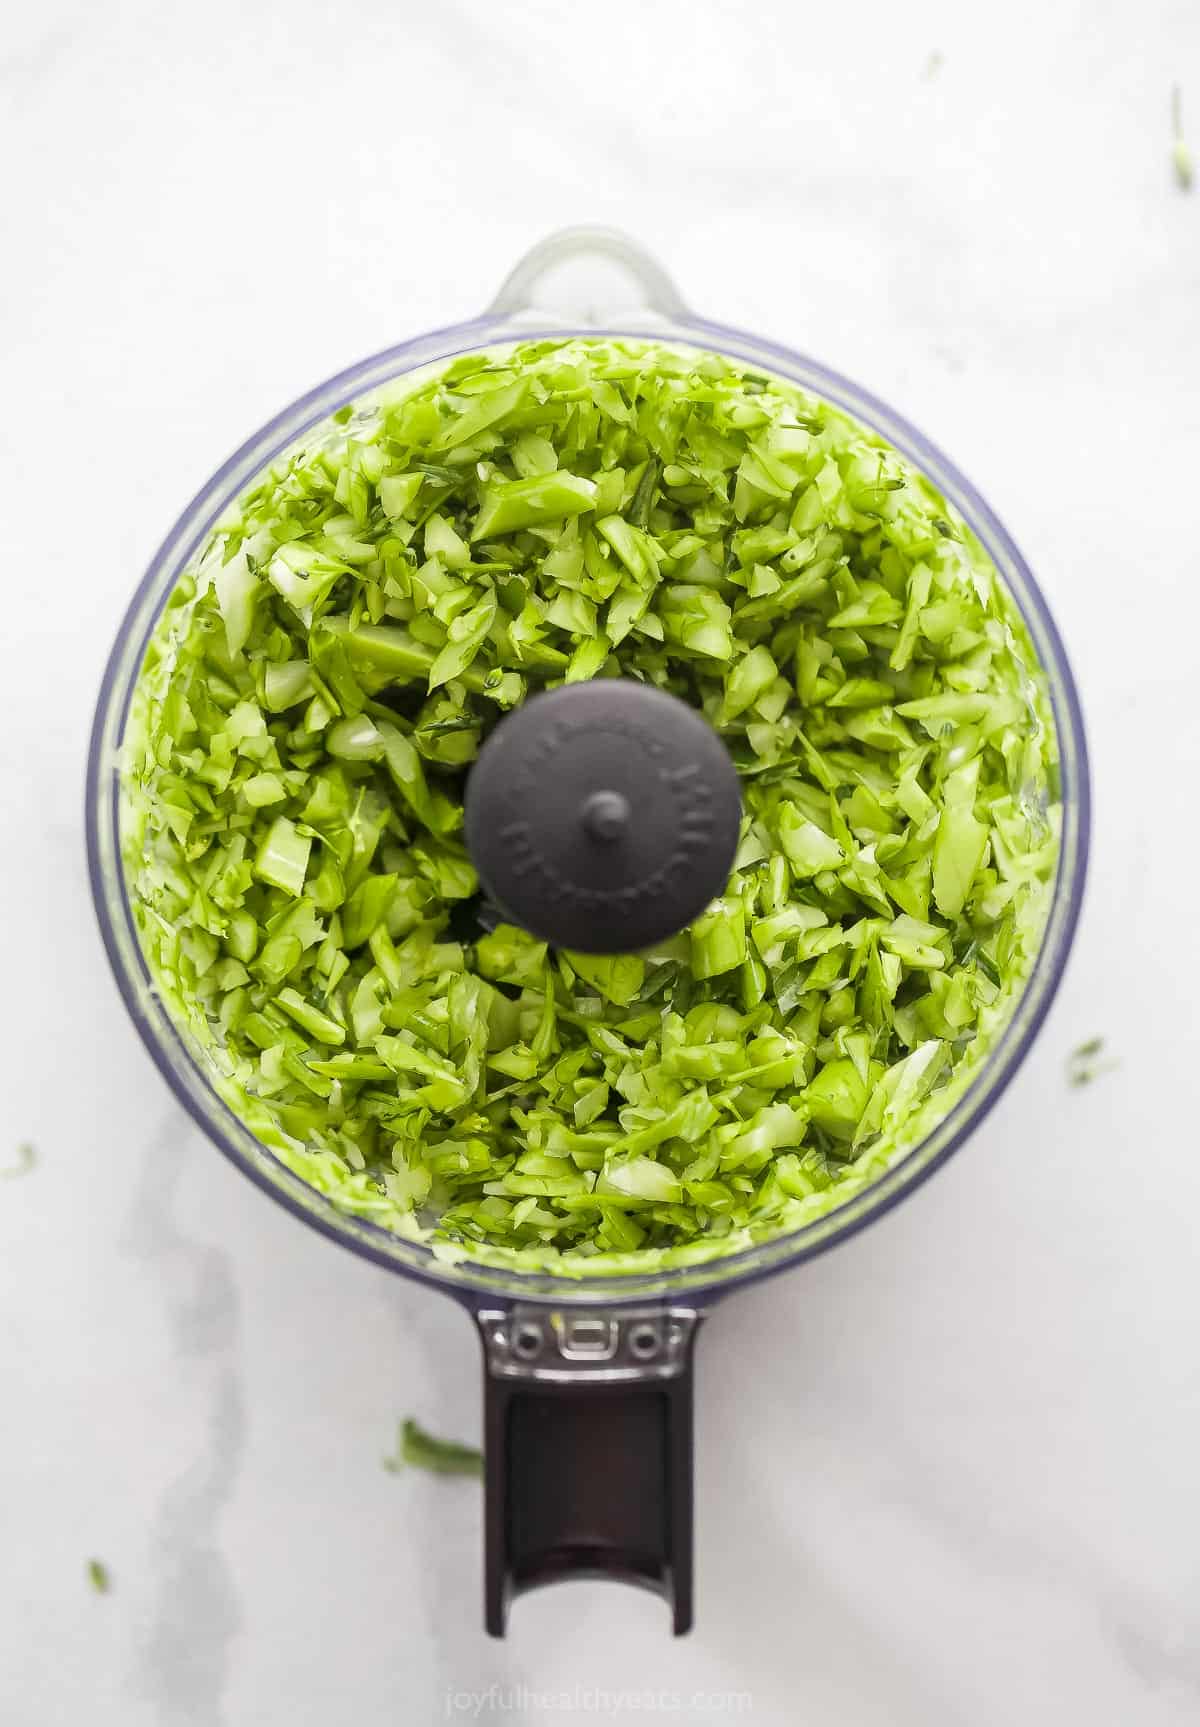 Chopped broccolini stems inside of a food processor on a kitchen countertop